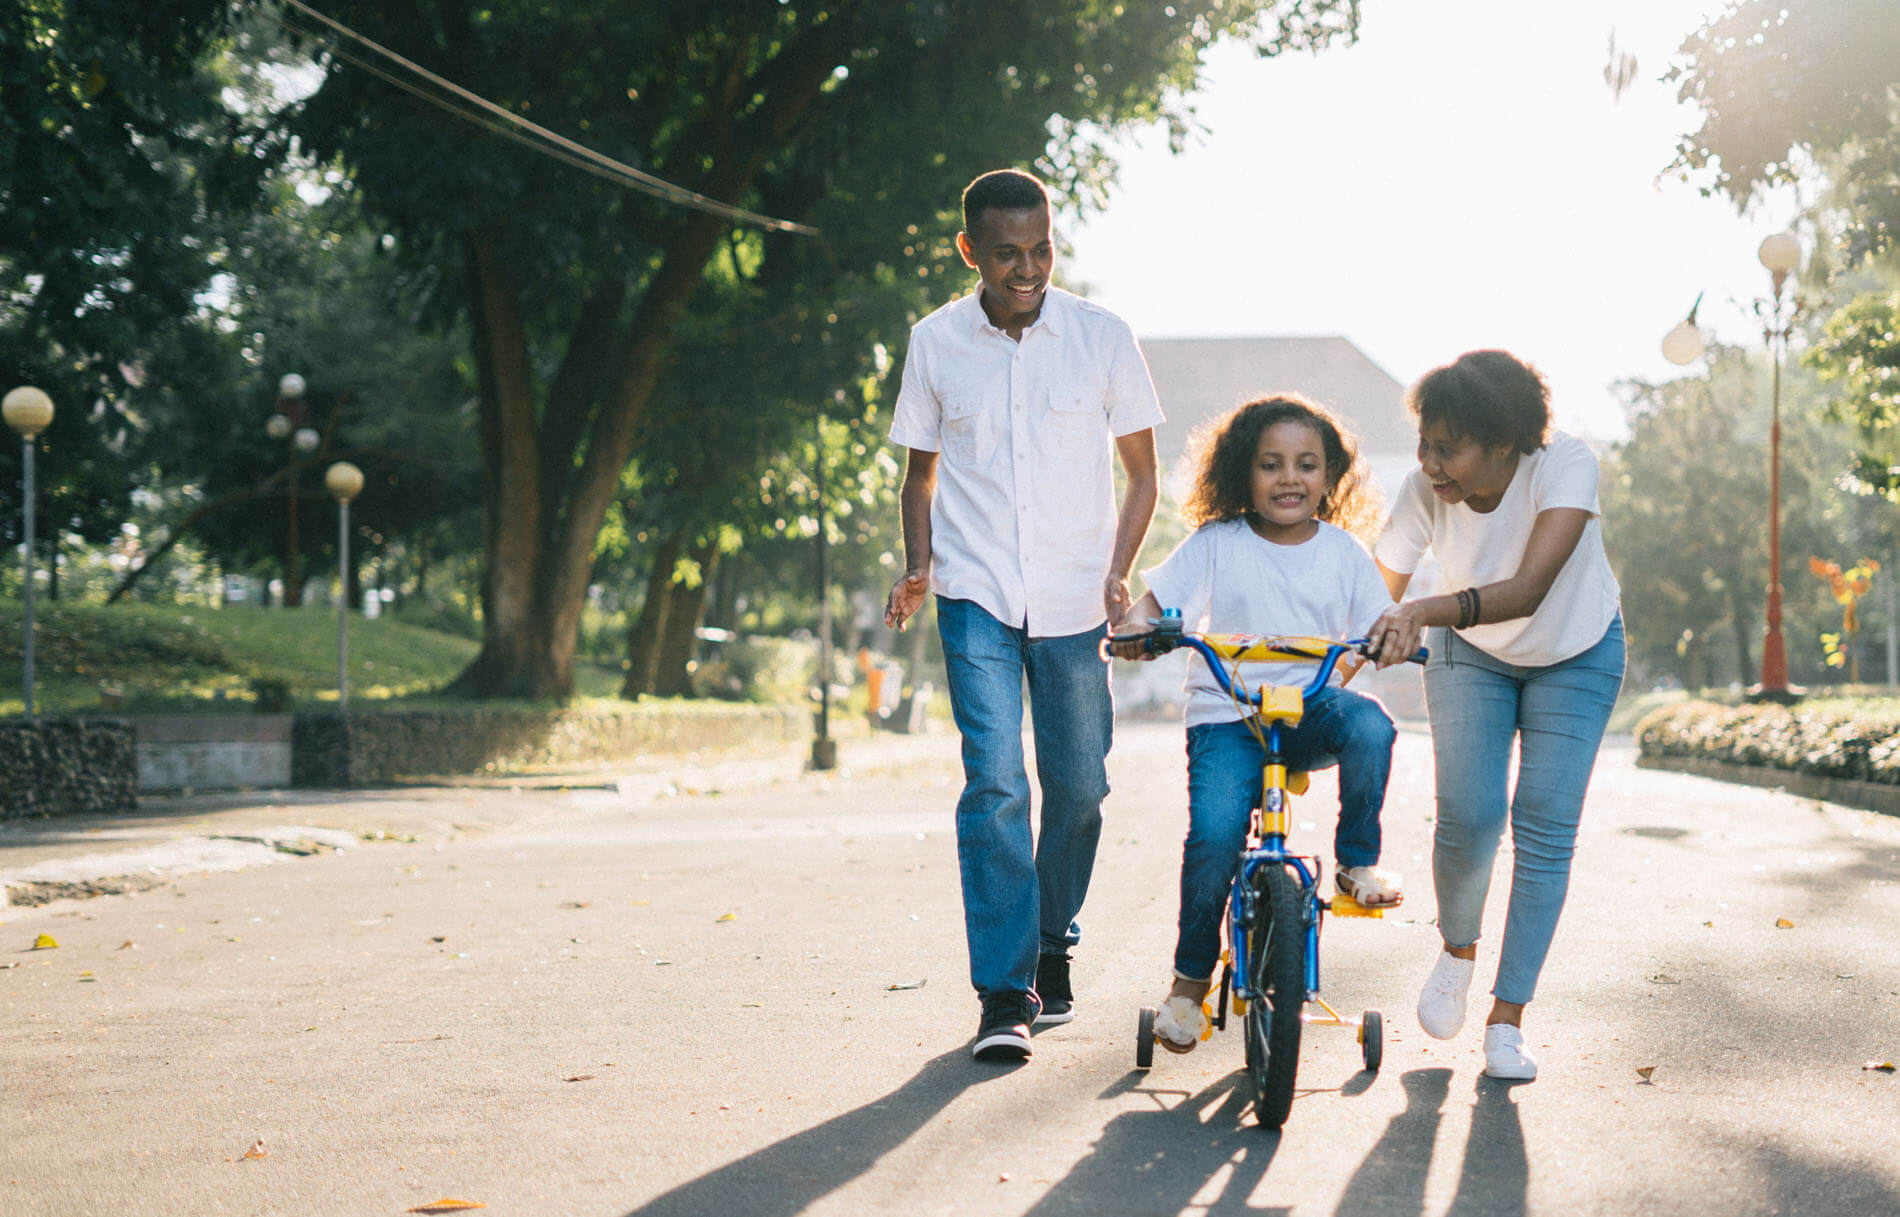 An image of a family with young daughter learning to ride a bike.